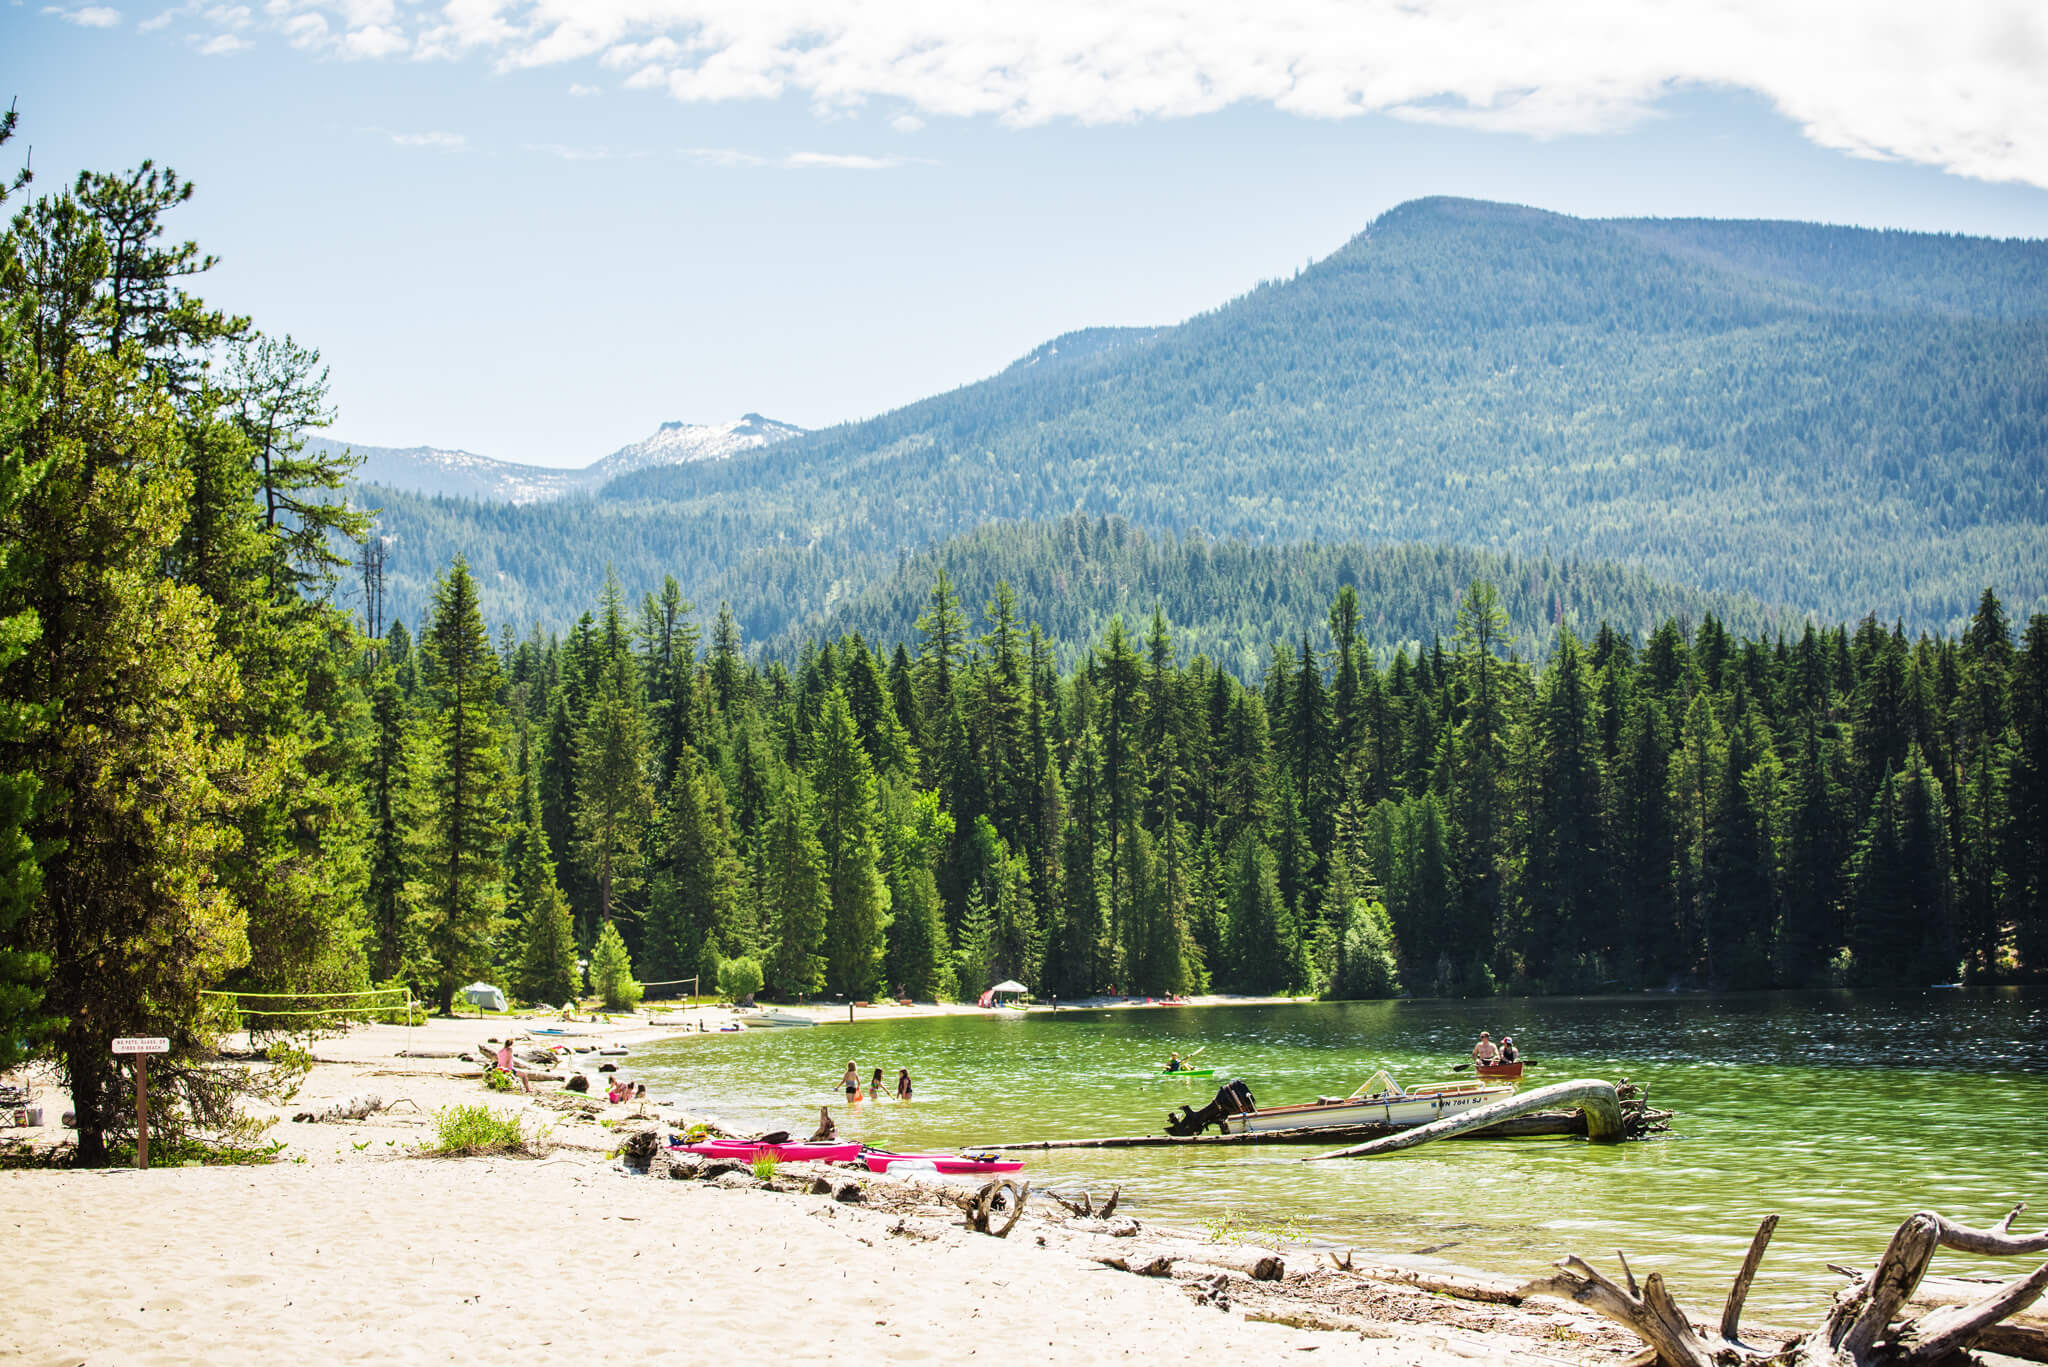 Several people relaxing on the beach and playing in the water at Priest Lake in Priest Lake State Park.